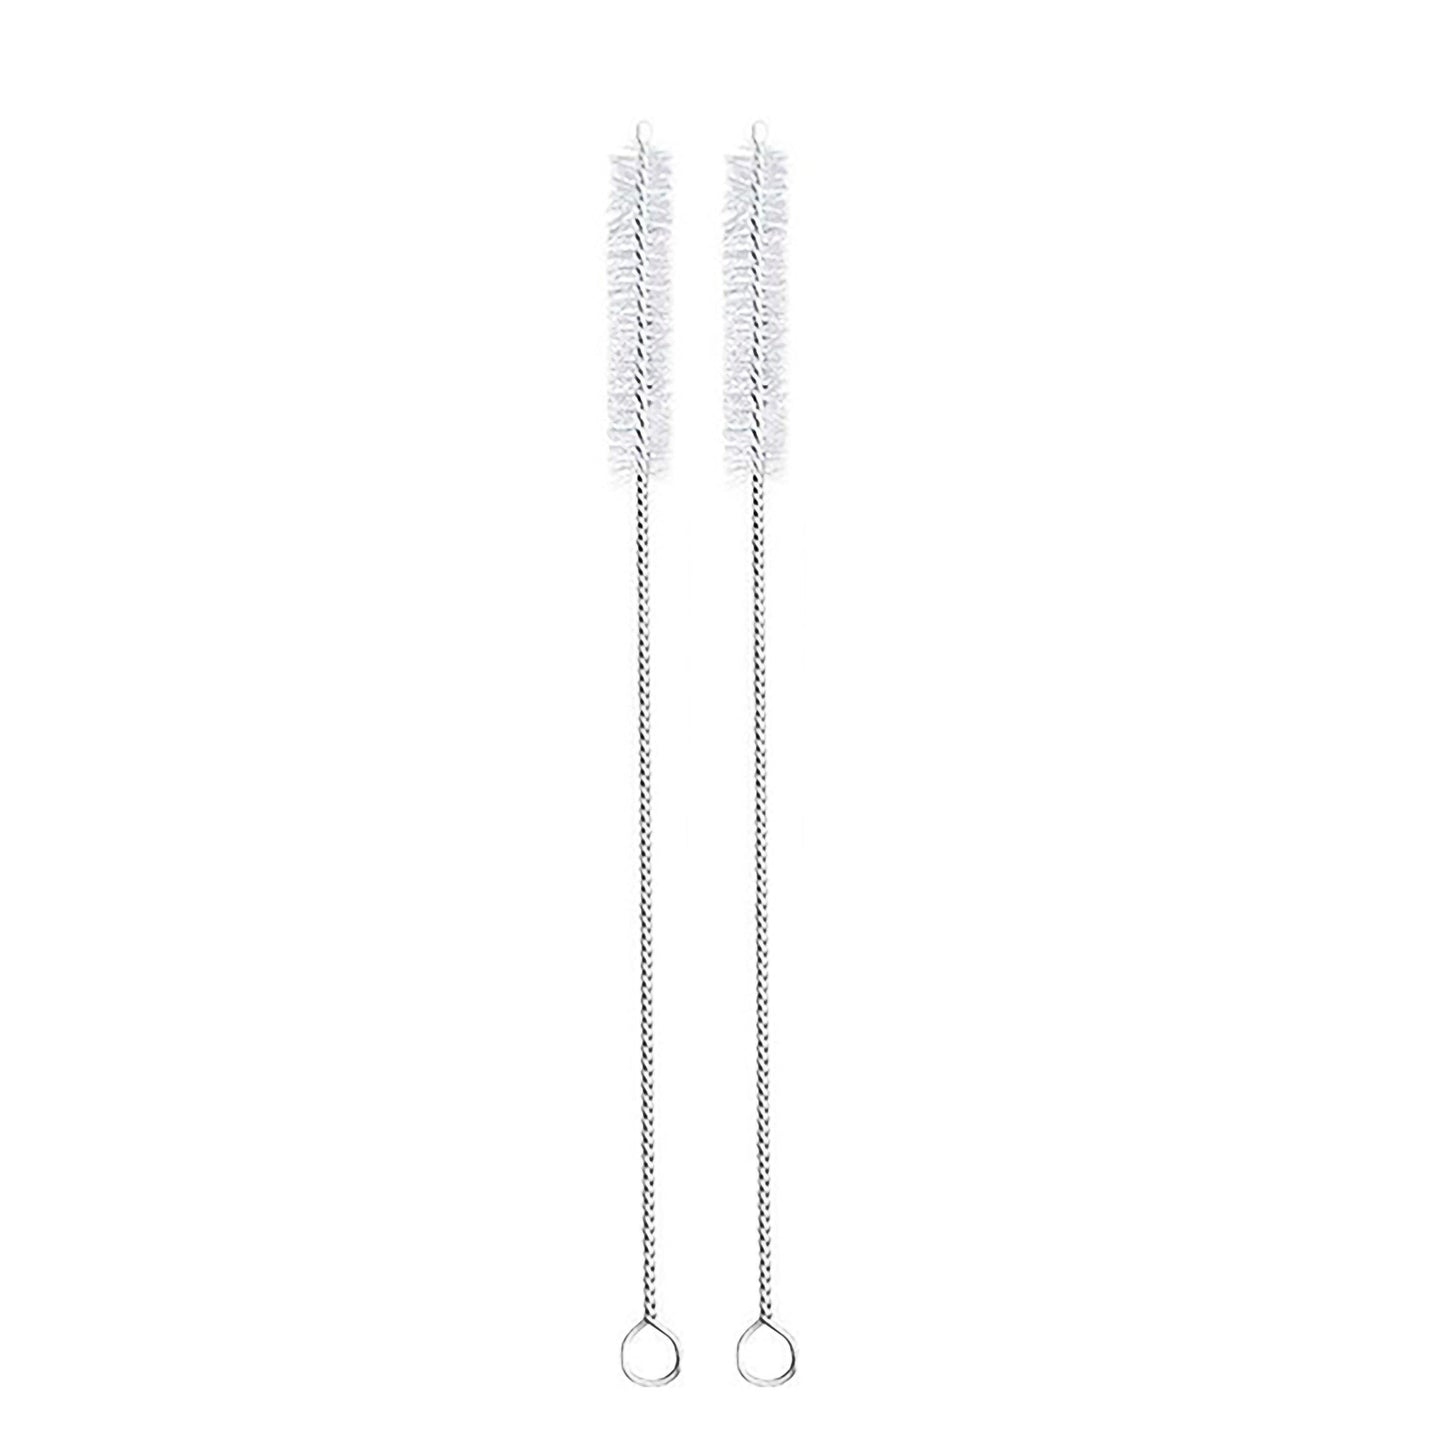 Bent Straw Pack with Vegan Cleaning Brush - Meals In Steel